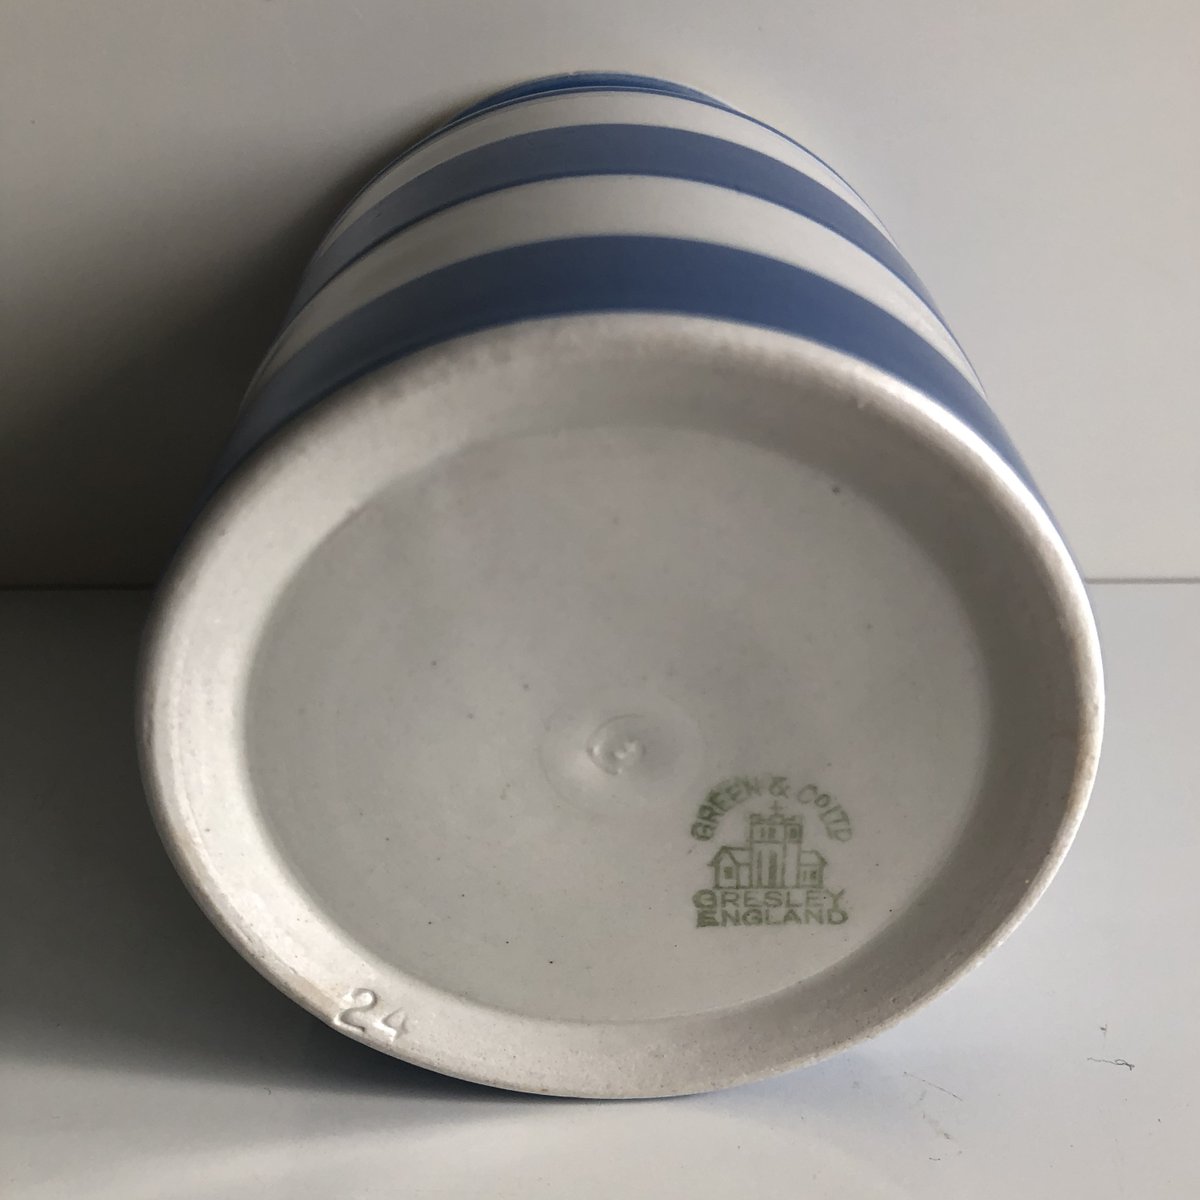 Here's a new #Cornishware name ! Not BI.CARB and not CARBONATE, but CARB.SODA ! The base dates the jar to c1923 - a rare find indeed 🤗 #gresley #swadlincote #derbyshire #bicarbonate #soda